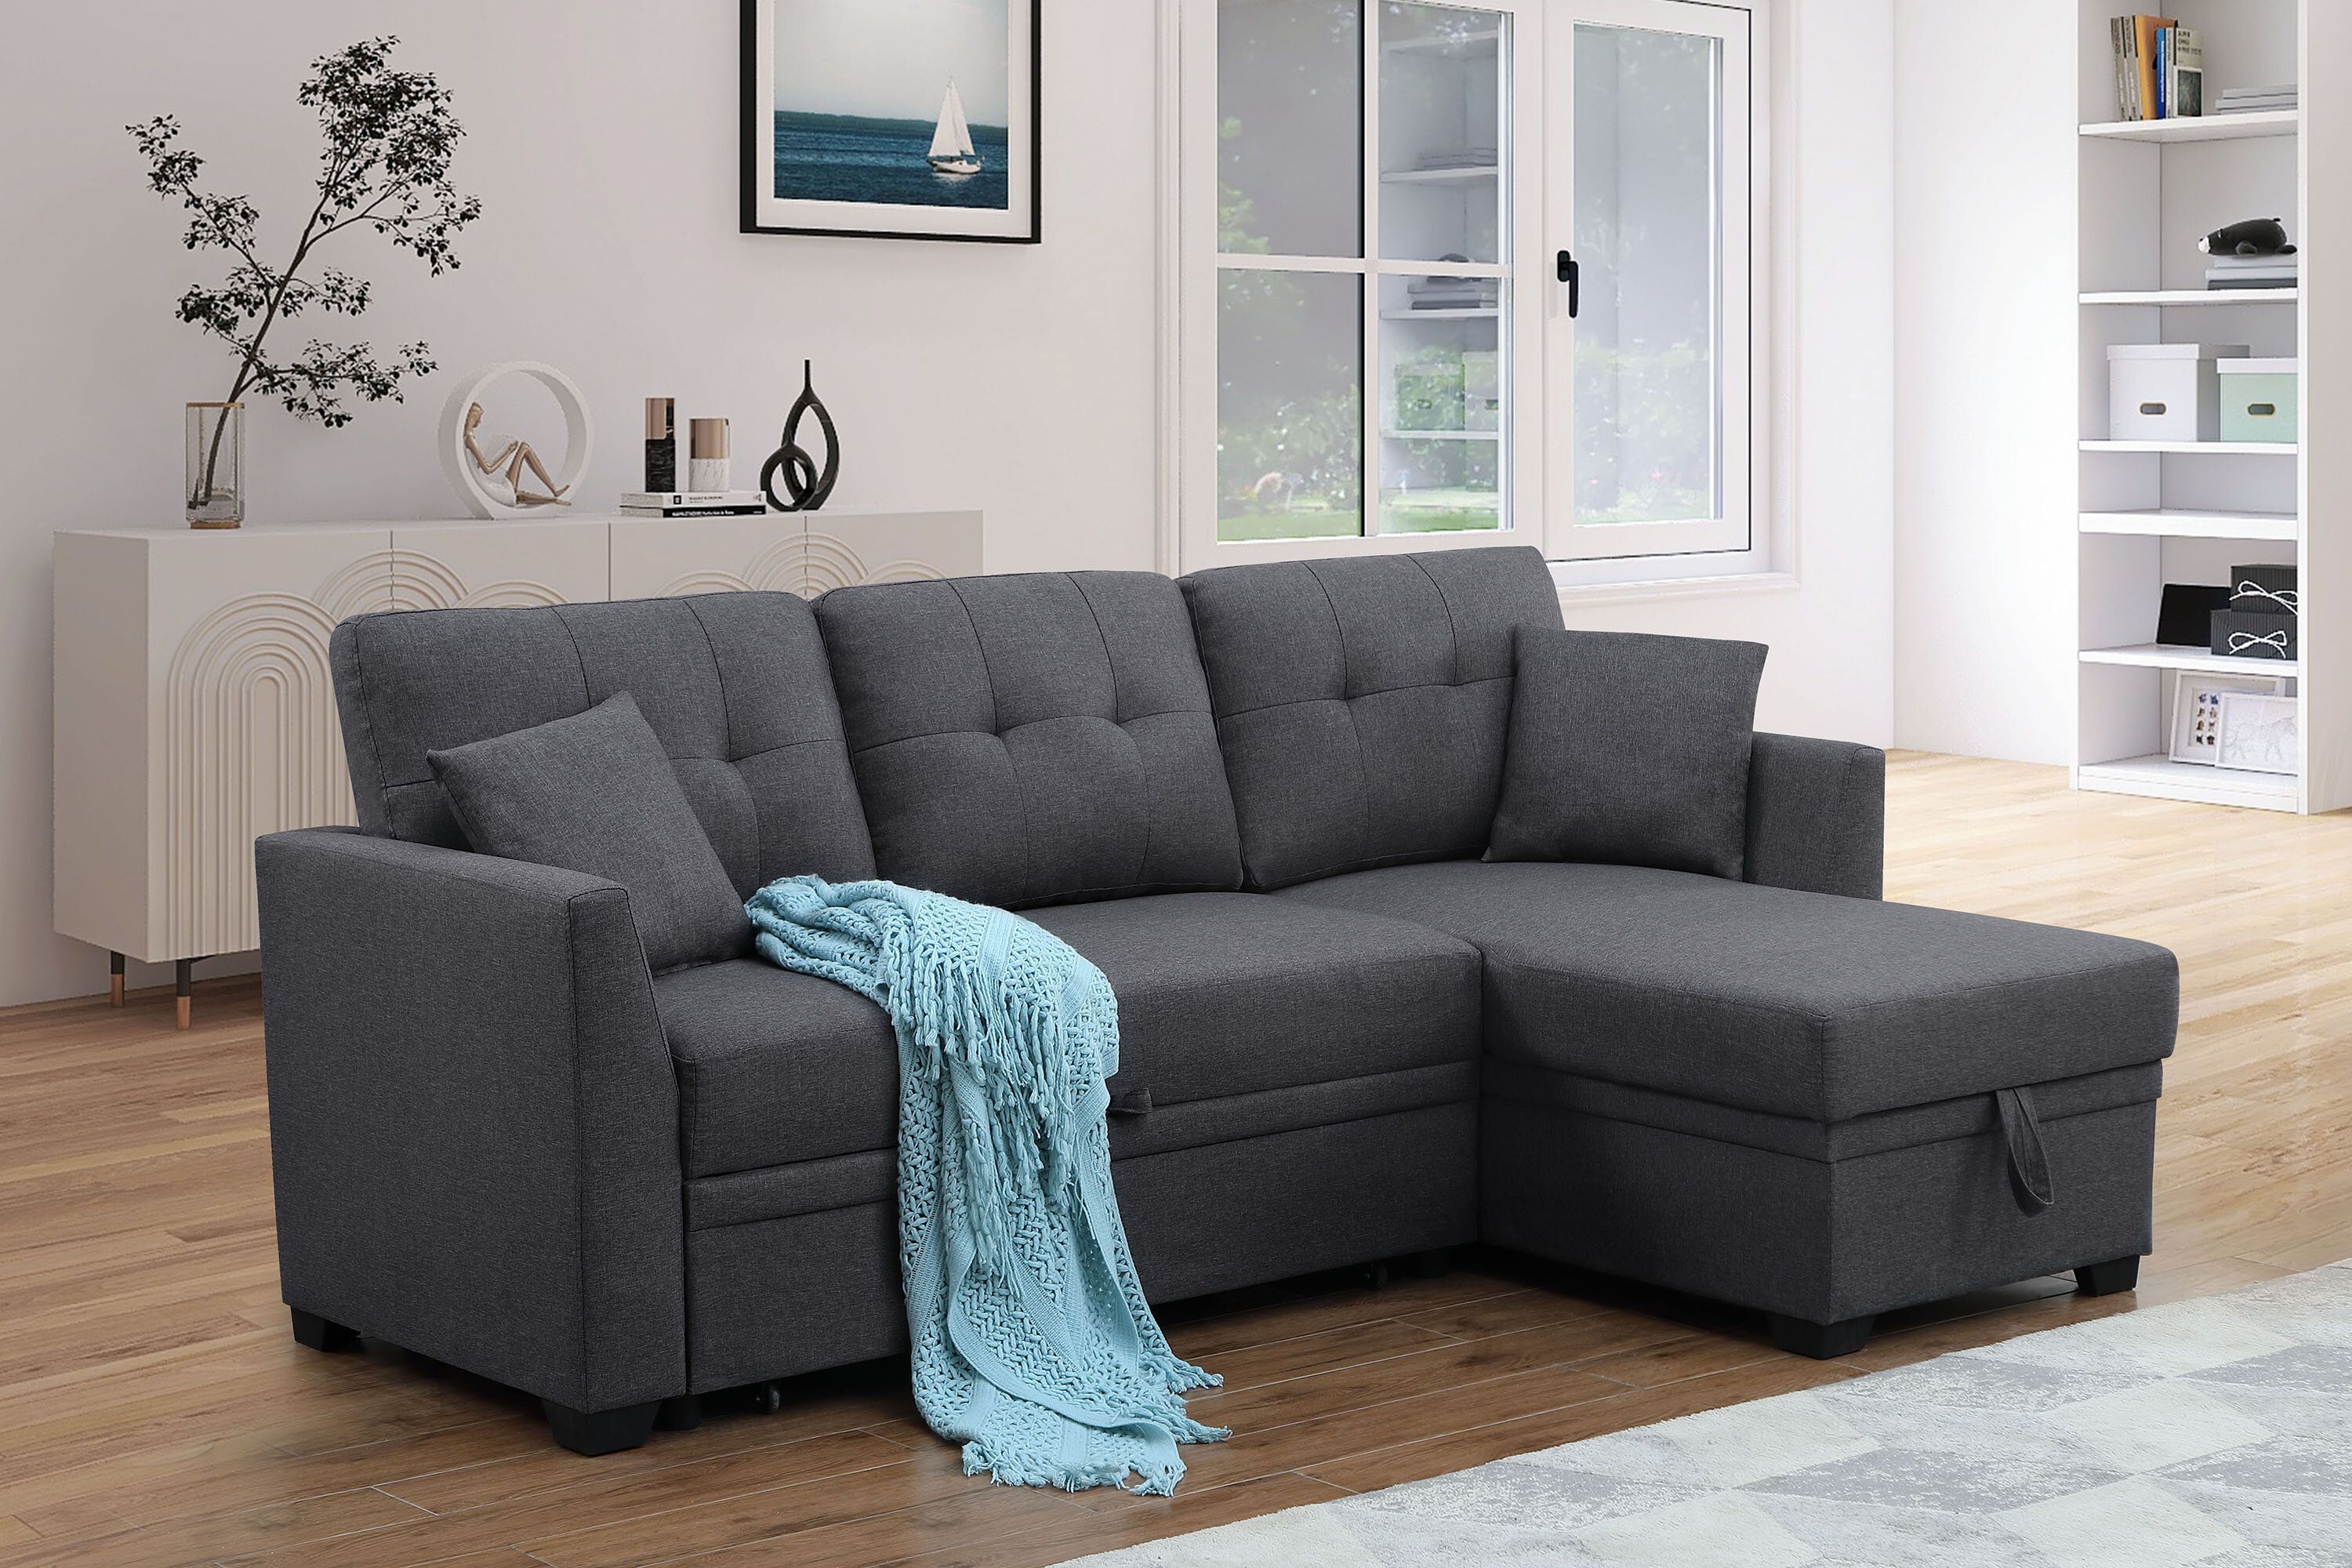 Alexent Sleeper Sofa & Reviews | Wayfair In Pull Out Couch Beds (Gallery 17 of 20)